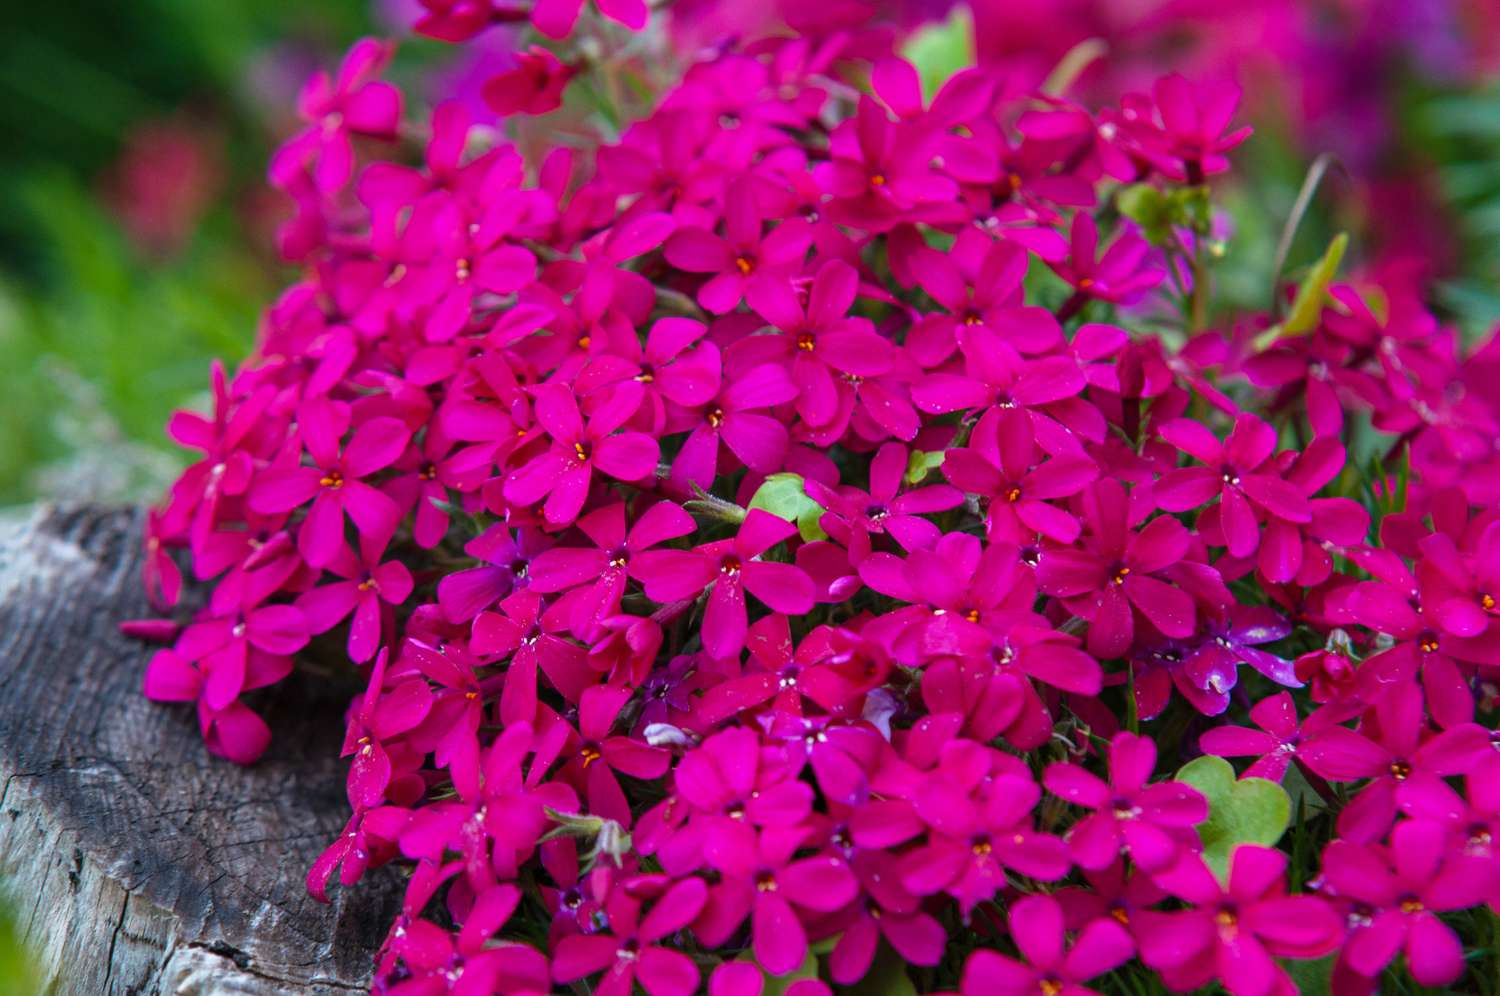 Creeping phlox plant with bright pink flowers clustered on tree stump closeup